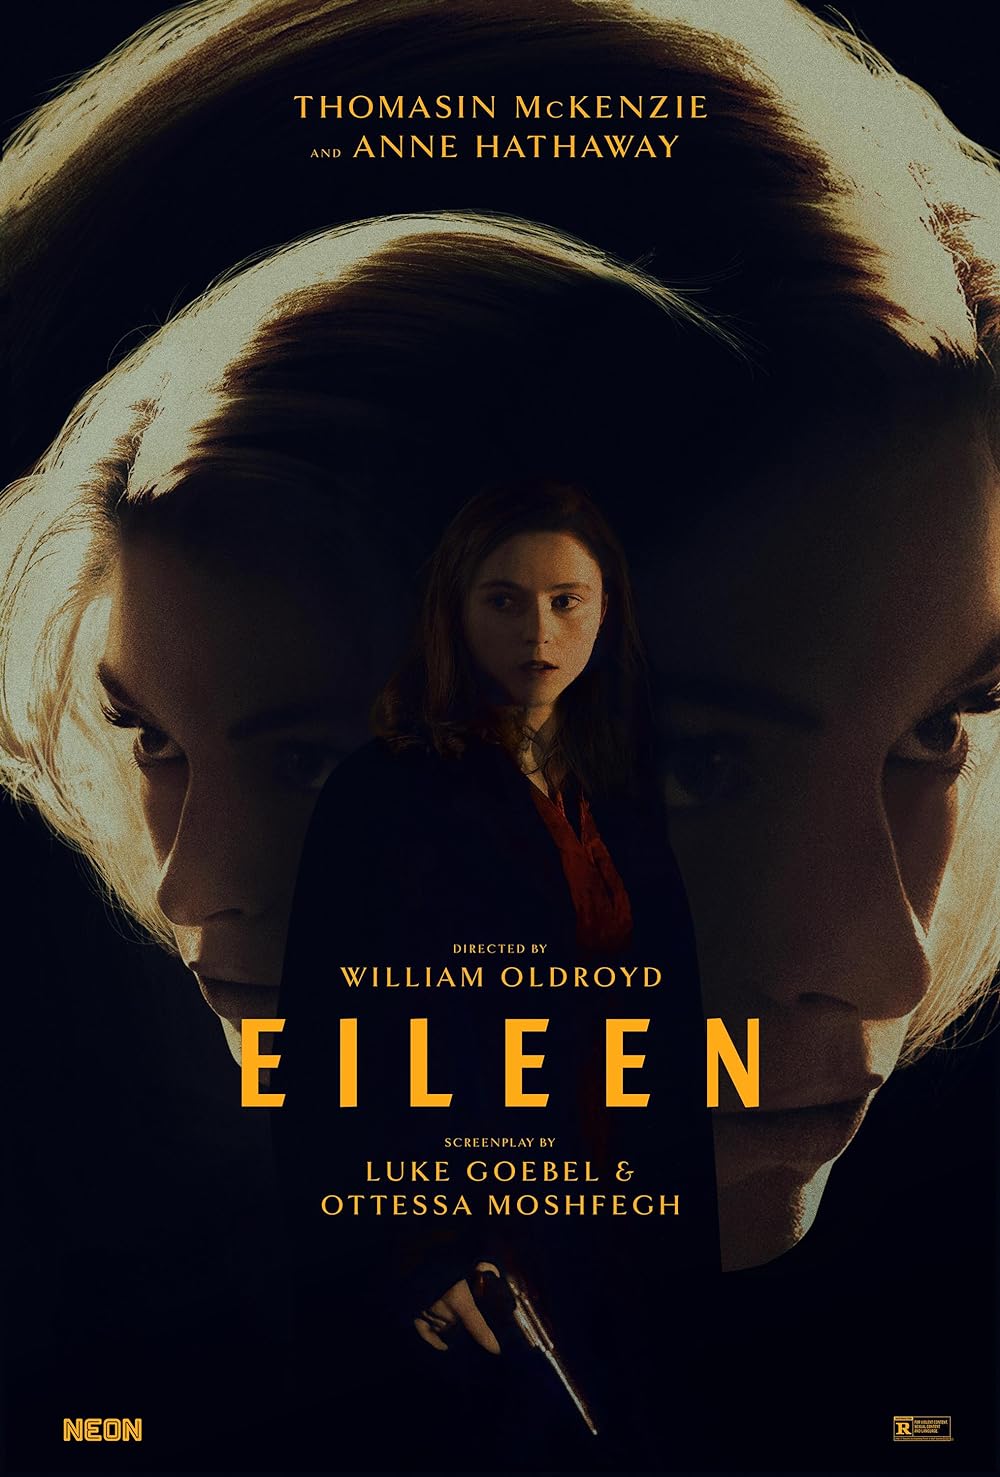 Eileen (June 1): A gripping mystery thriller featuring Anne Hathaway and Thomasin McKenzie, coming to JioCinema.